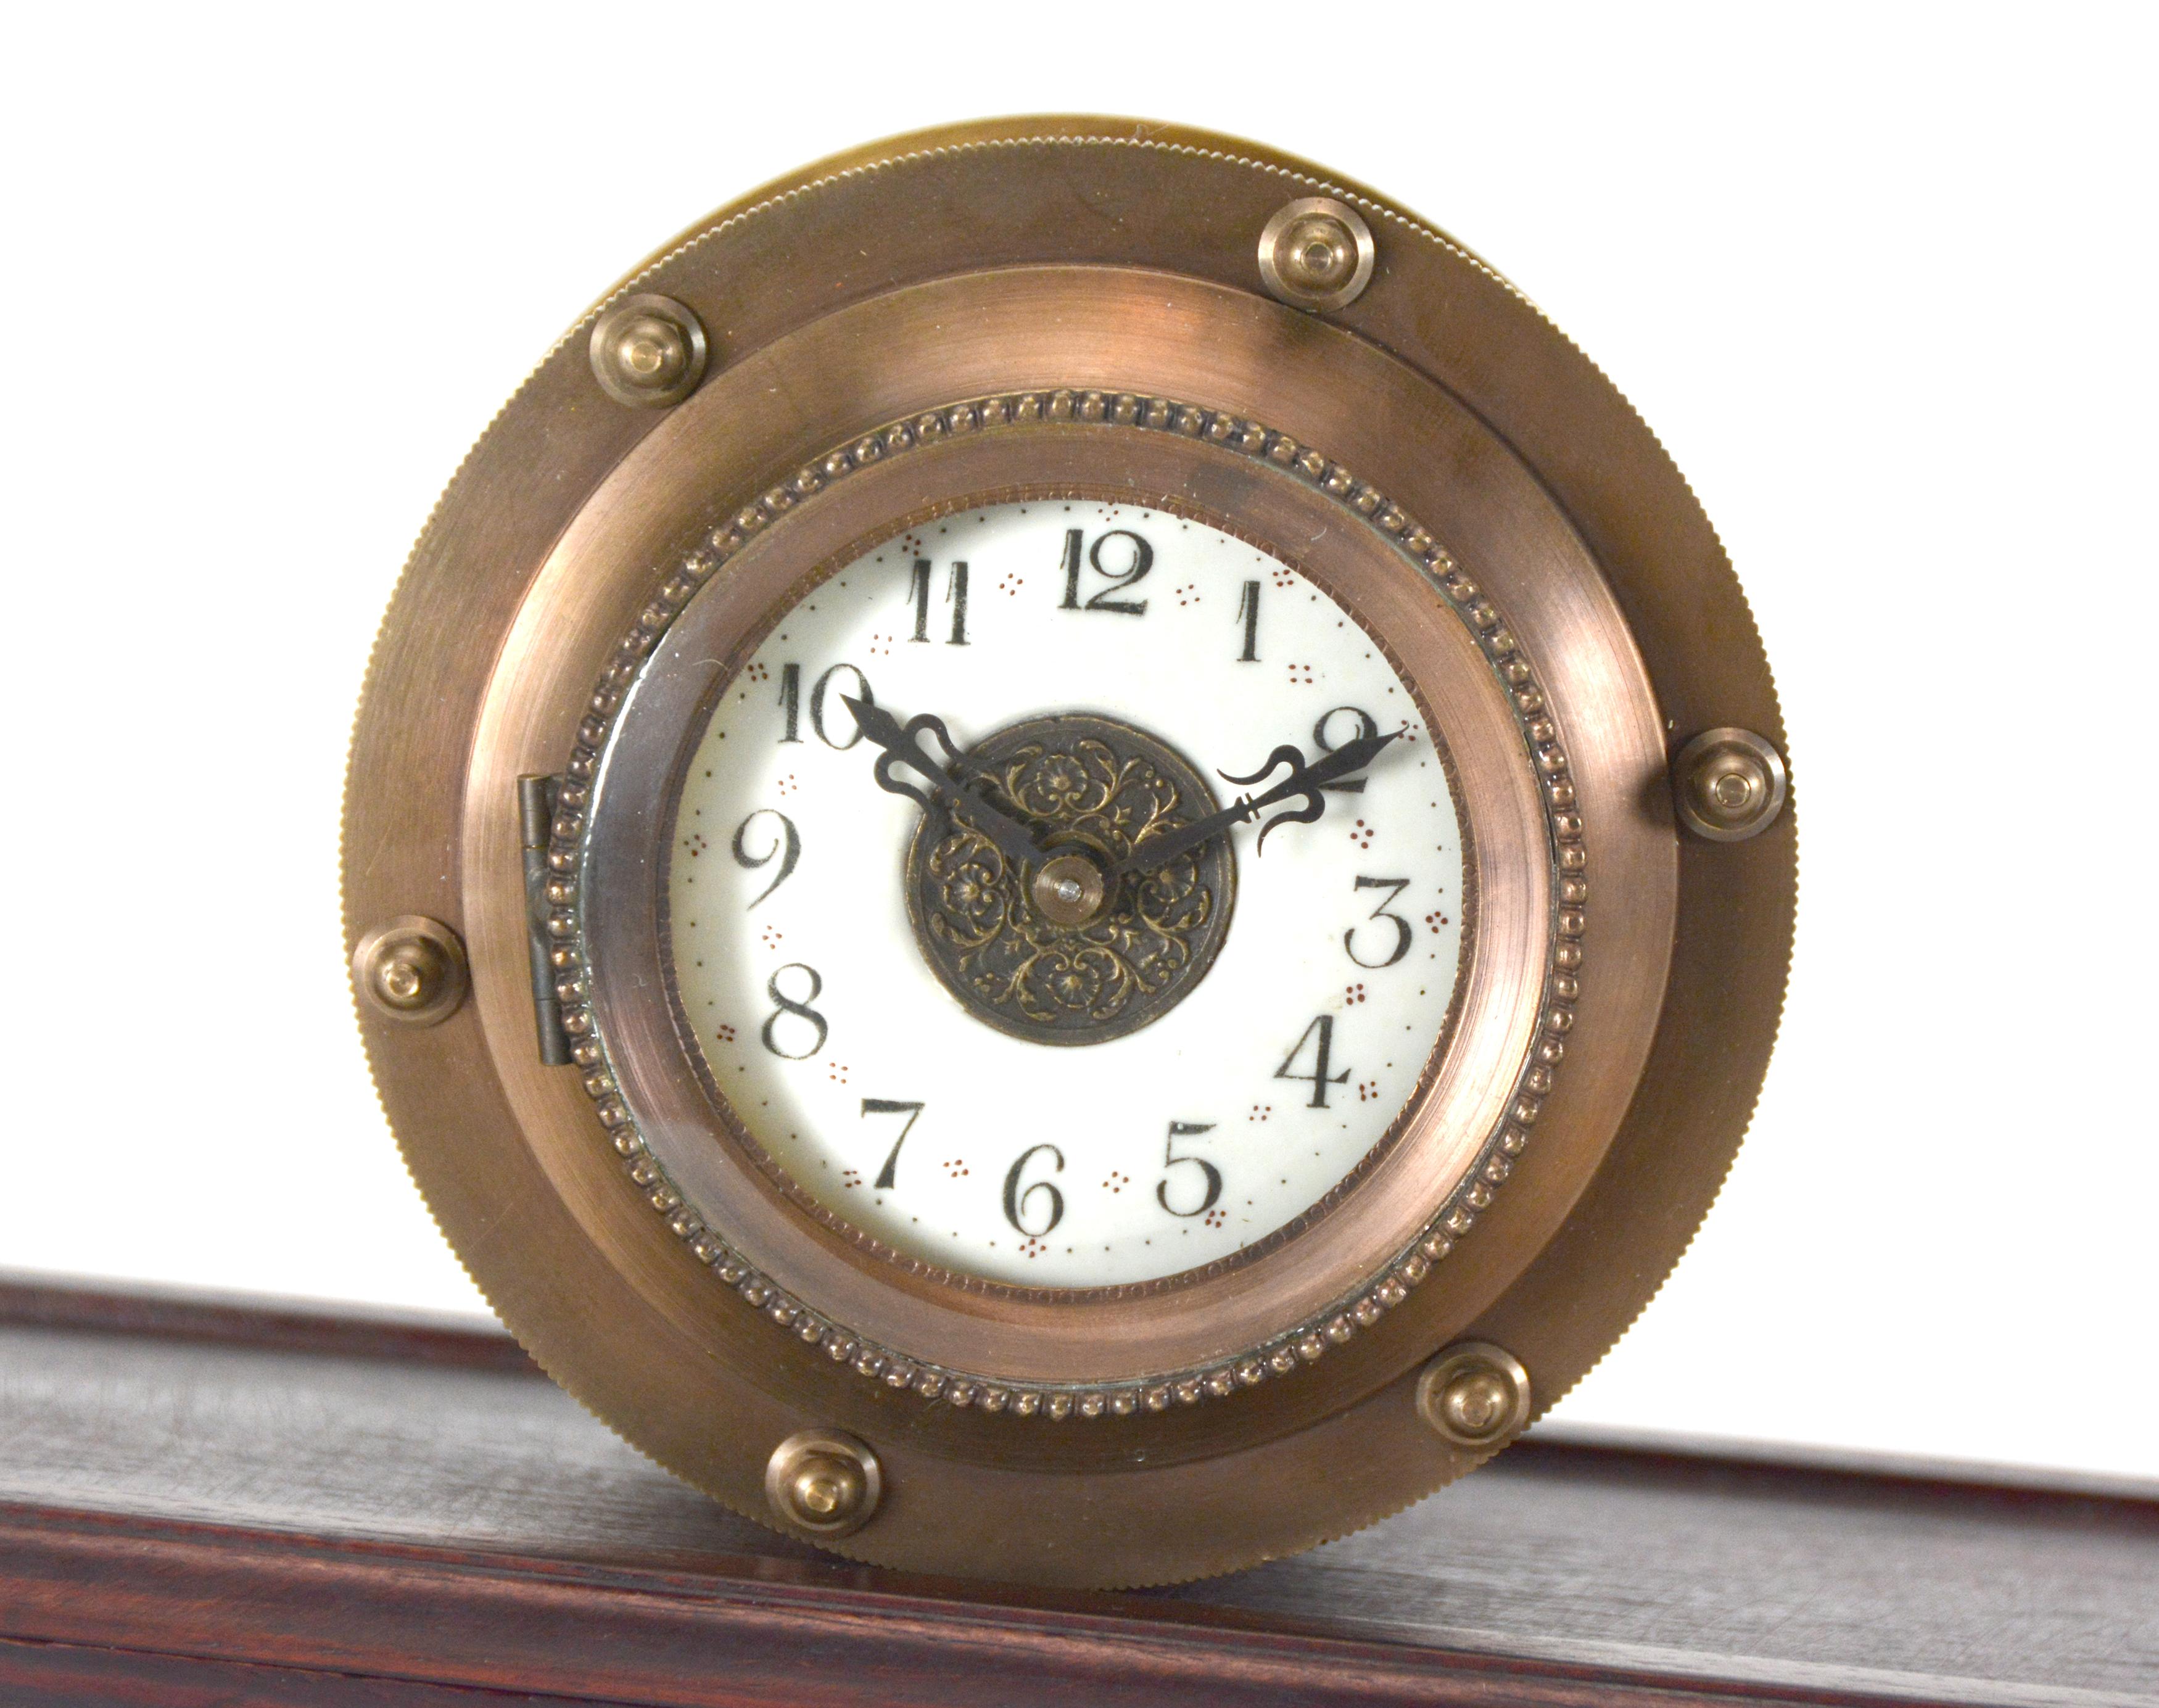 French Mystery Gravity Driven Gilt Incline Rolling Clock - No Spring or Battery In Good Condition For Sale In Danville, CA